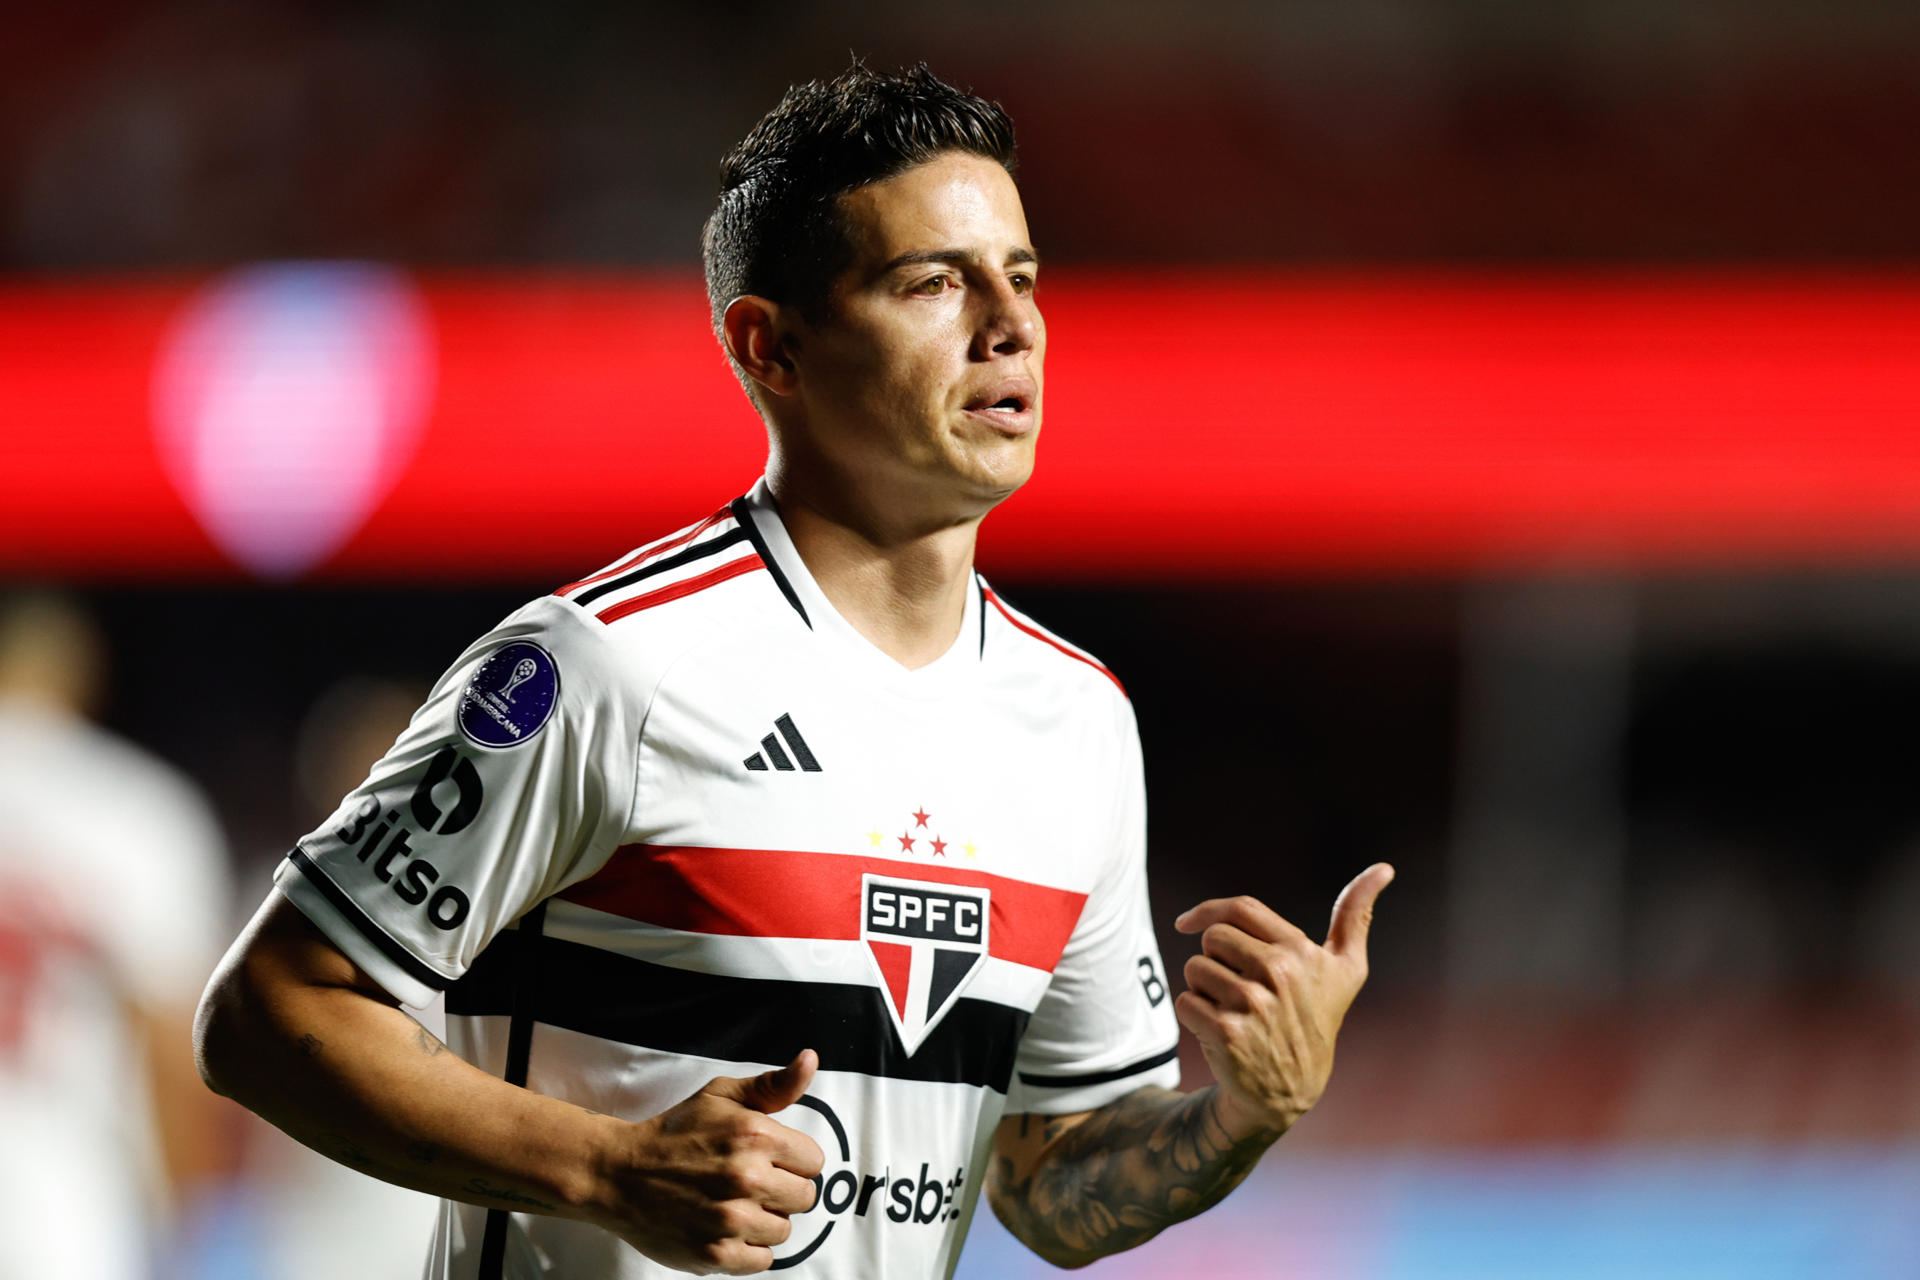 James closer to returning to Spain after terminating Sao Paulo contract